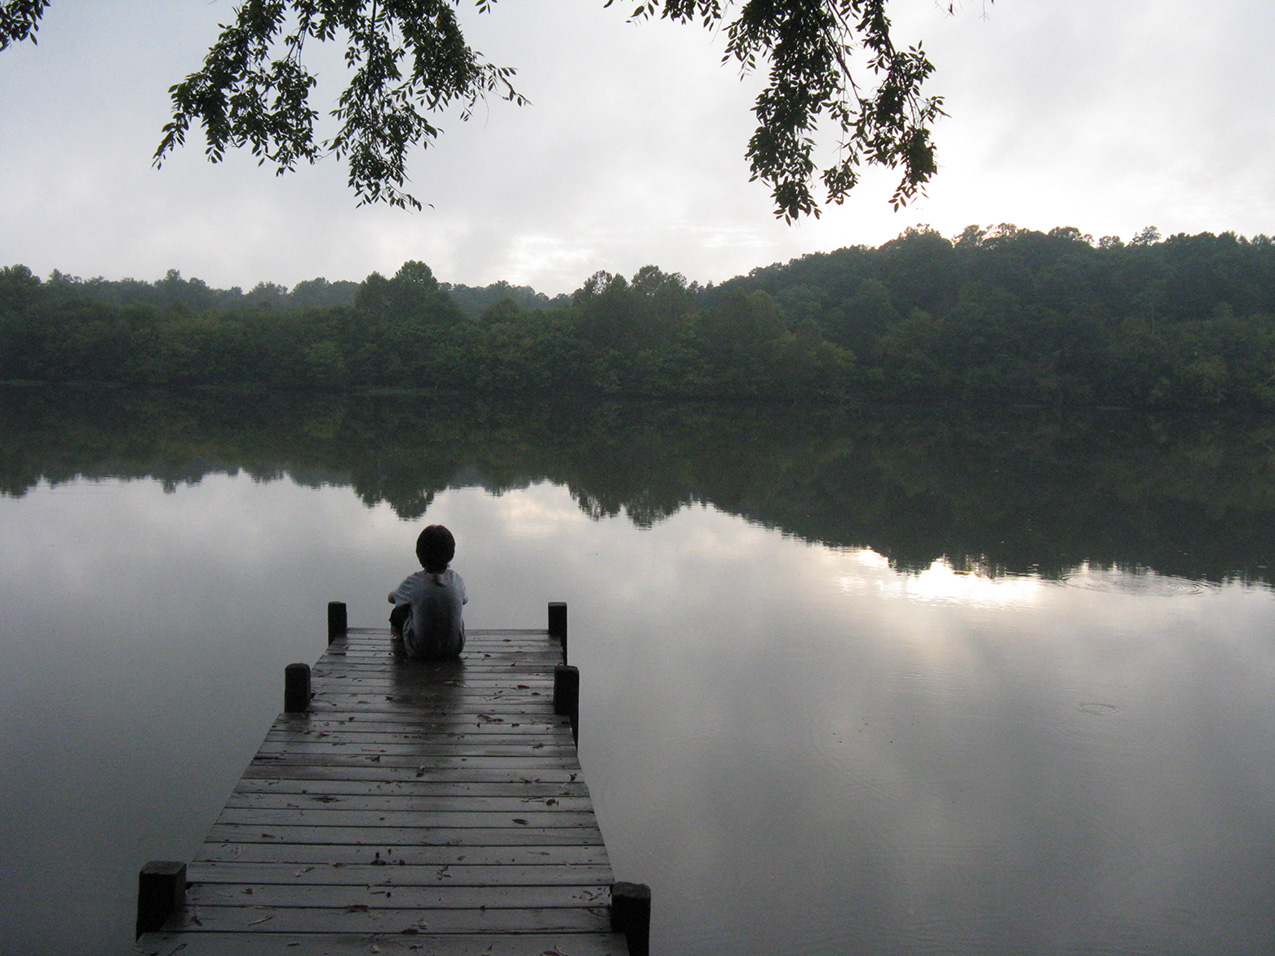 a small boy, seen from behind, sits on a dock with his knees hugged to his chest. the river is still, the sky is gray and cloudy.